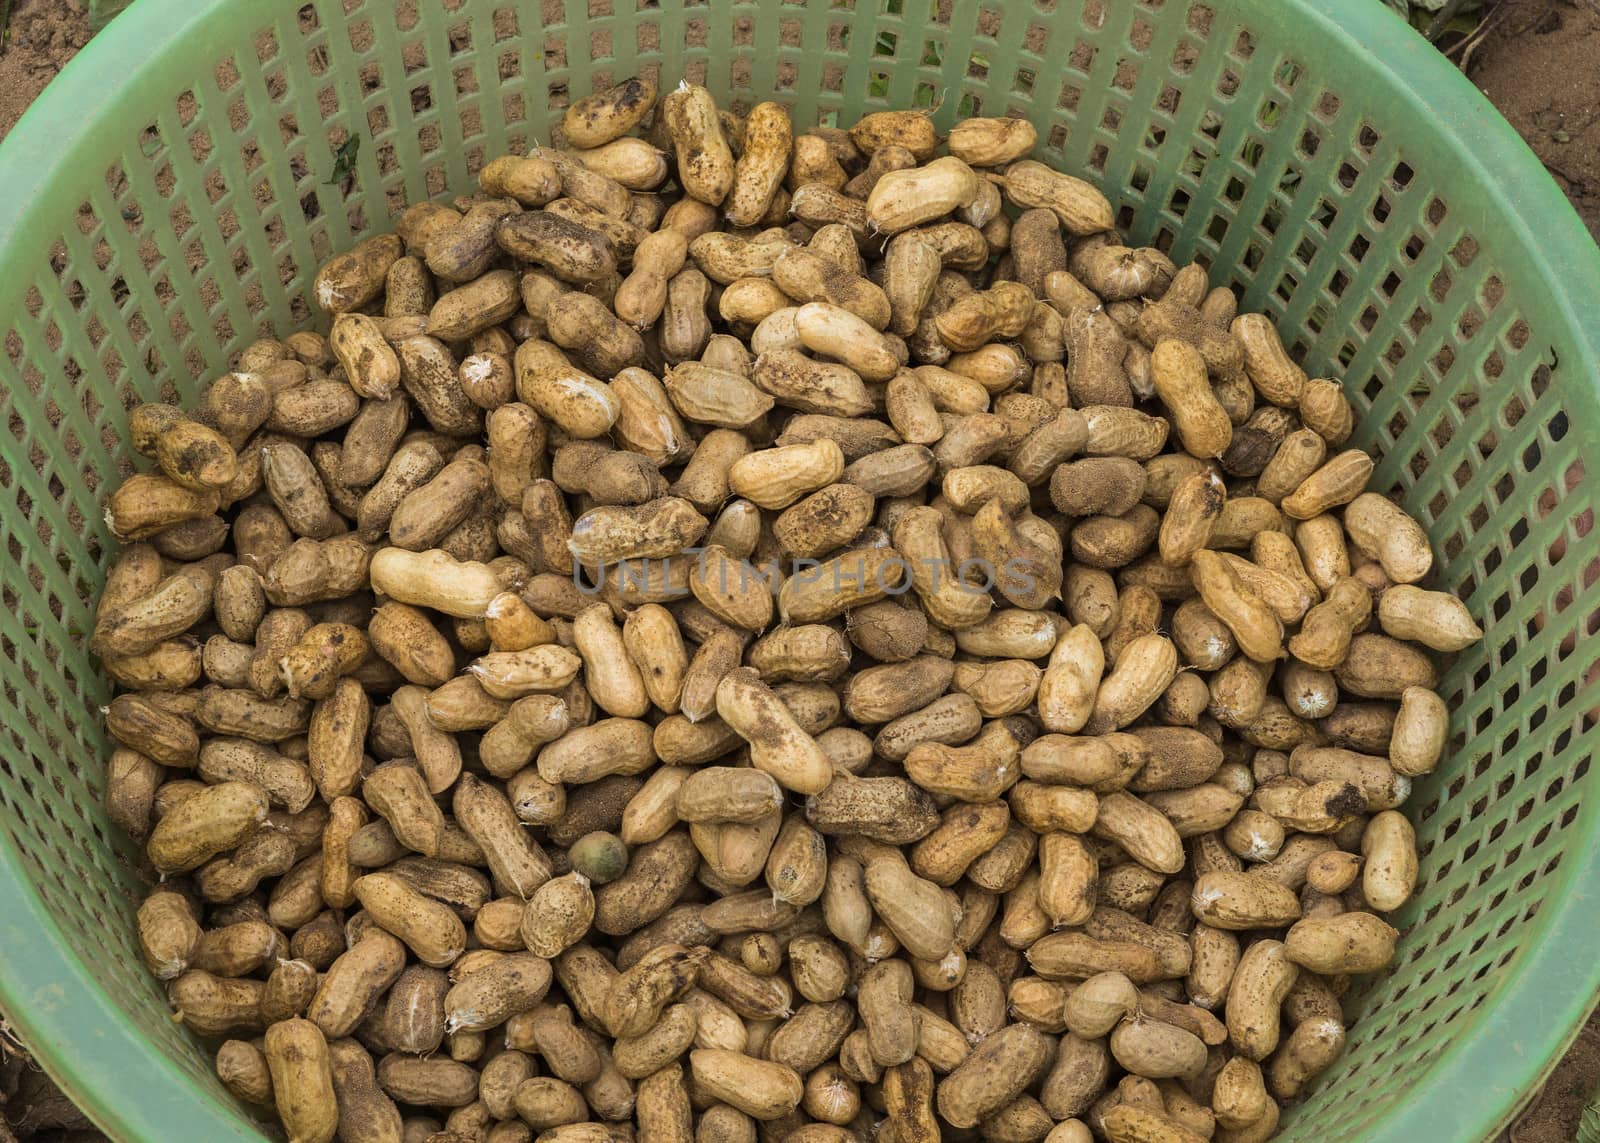 Green basket filled with freshly harvested peanuts.